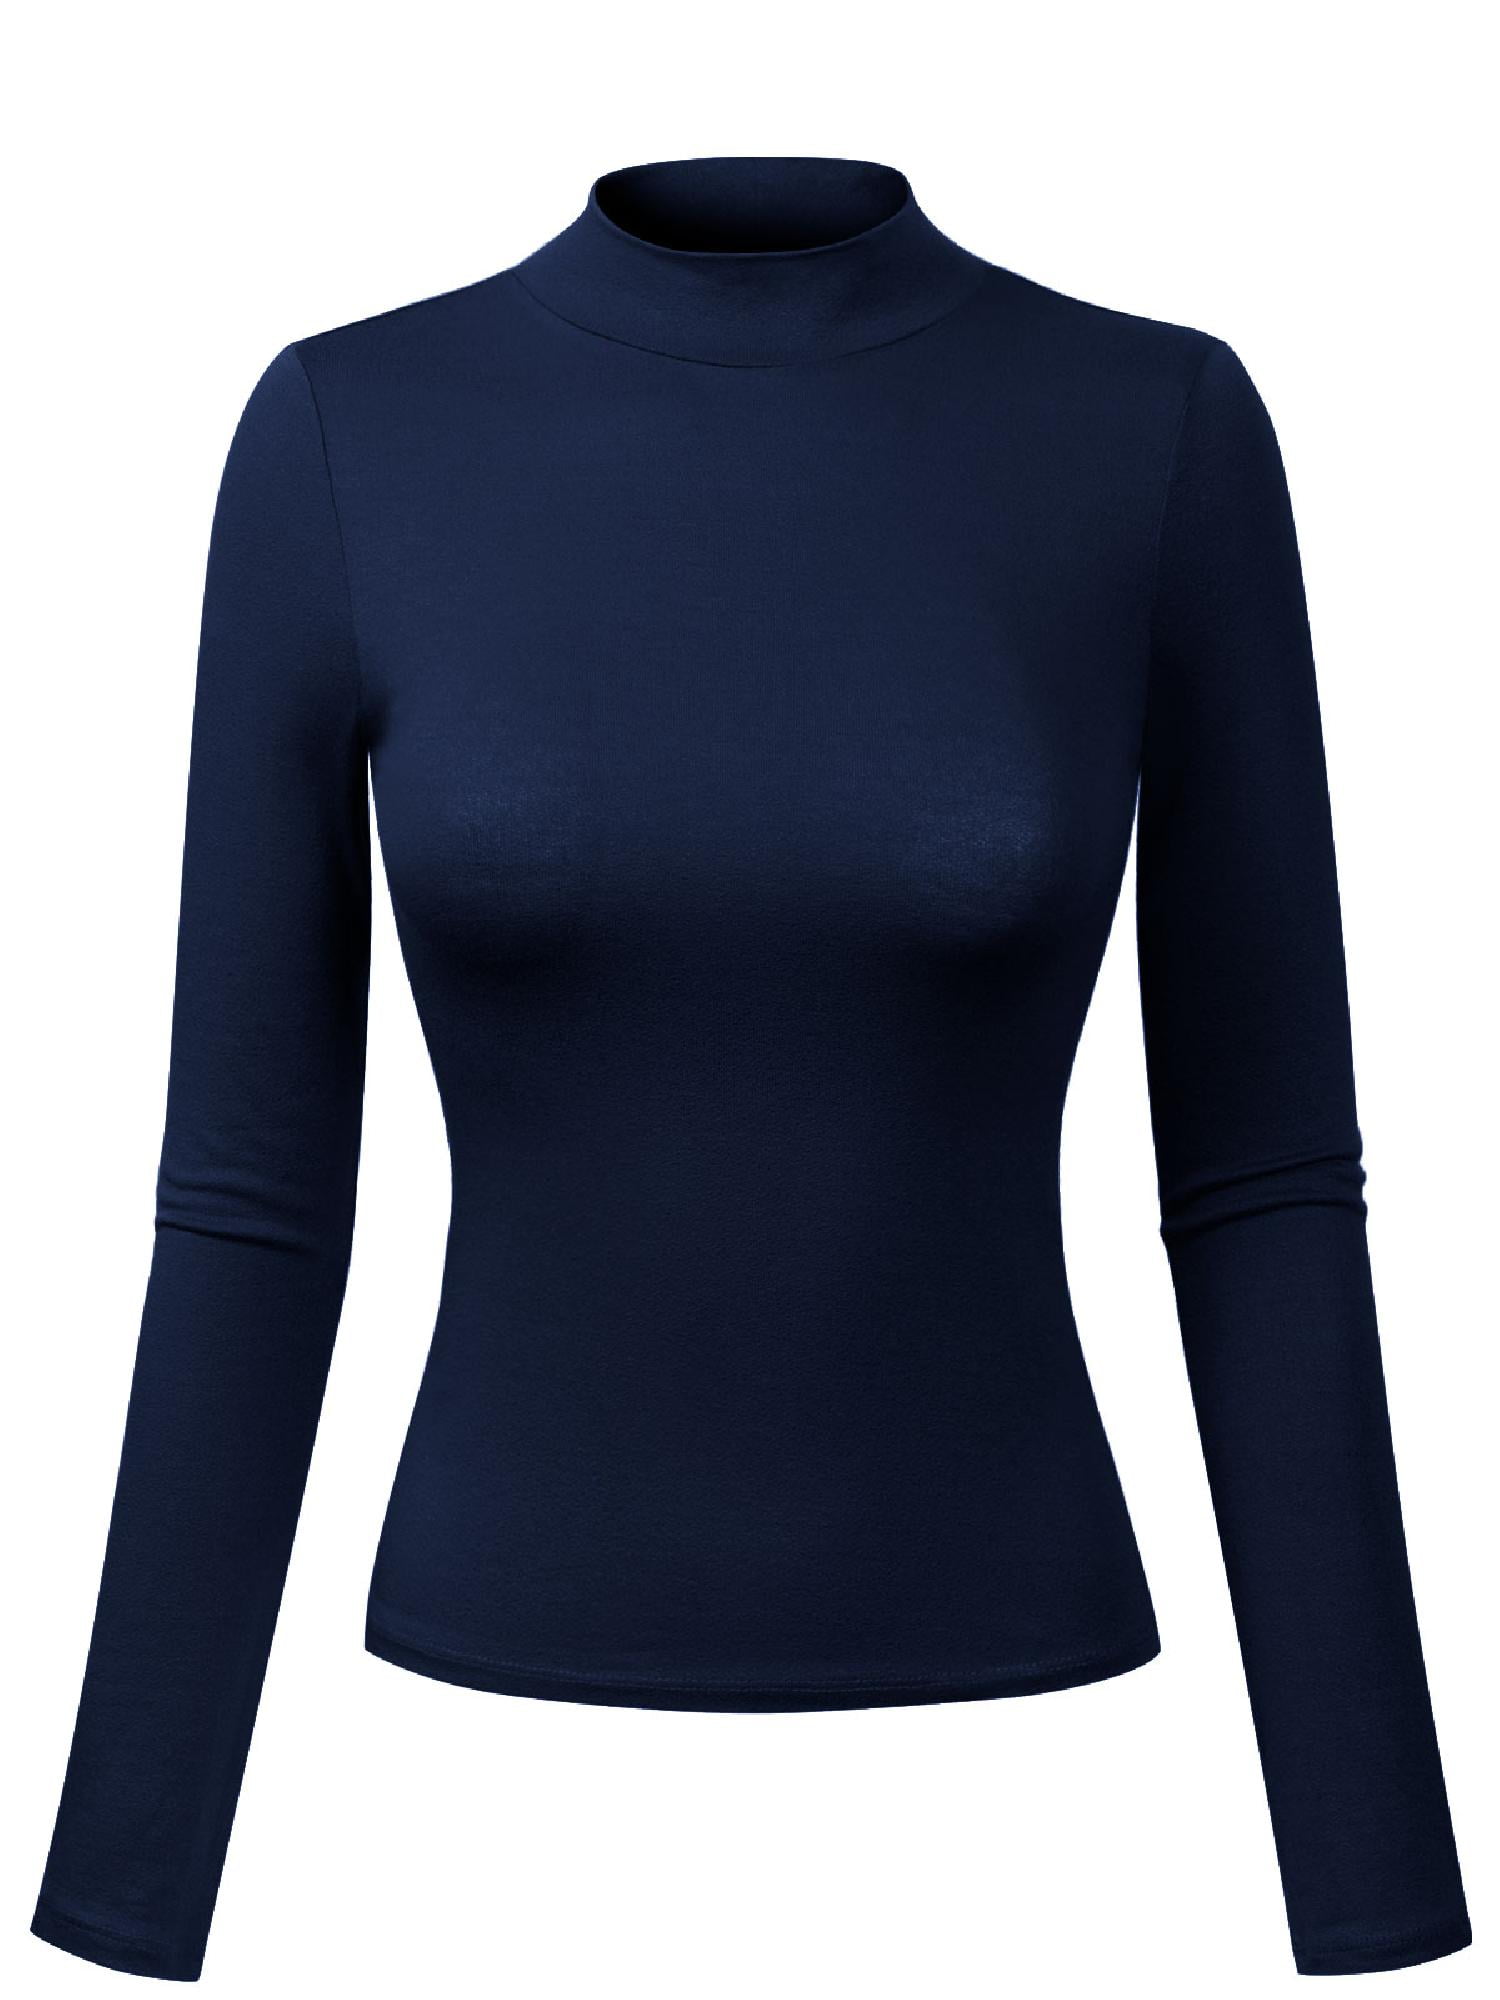 MixMatchy Women's Solid Tight Fit Lightweight Long Sleeves Mock Neck Top 